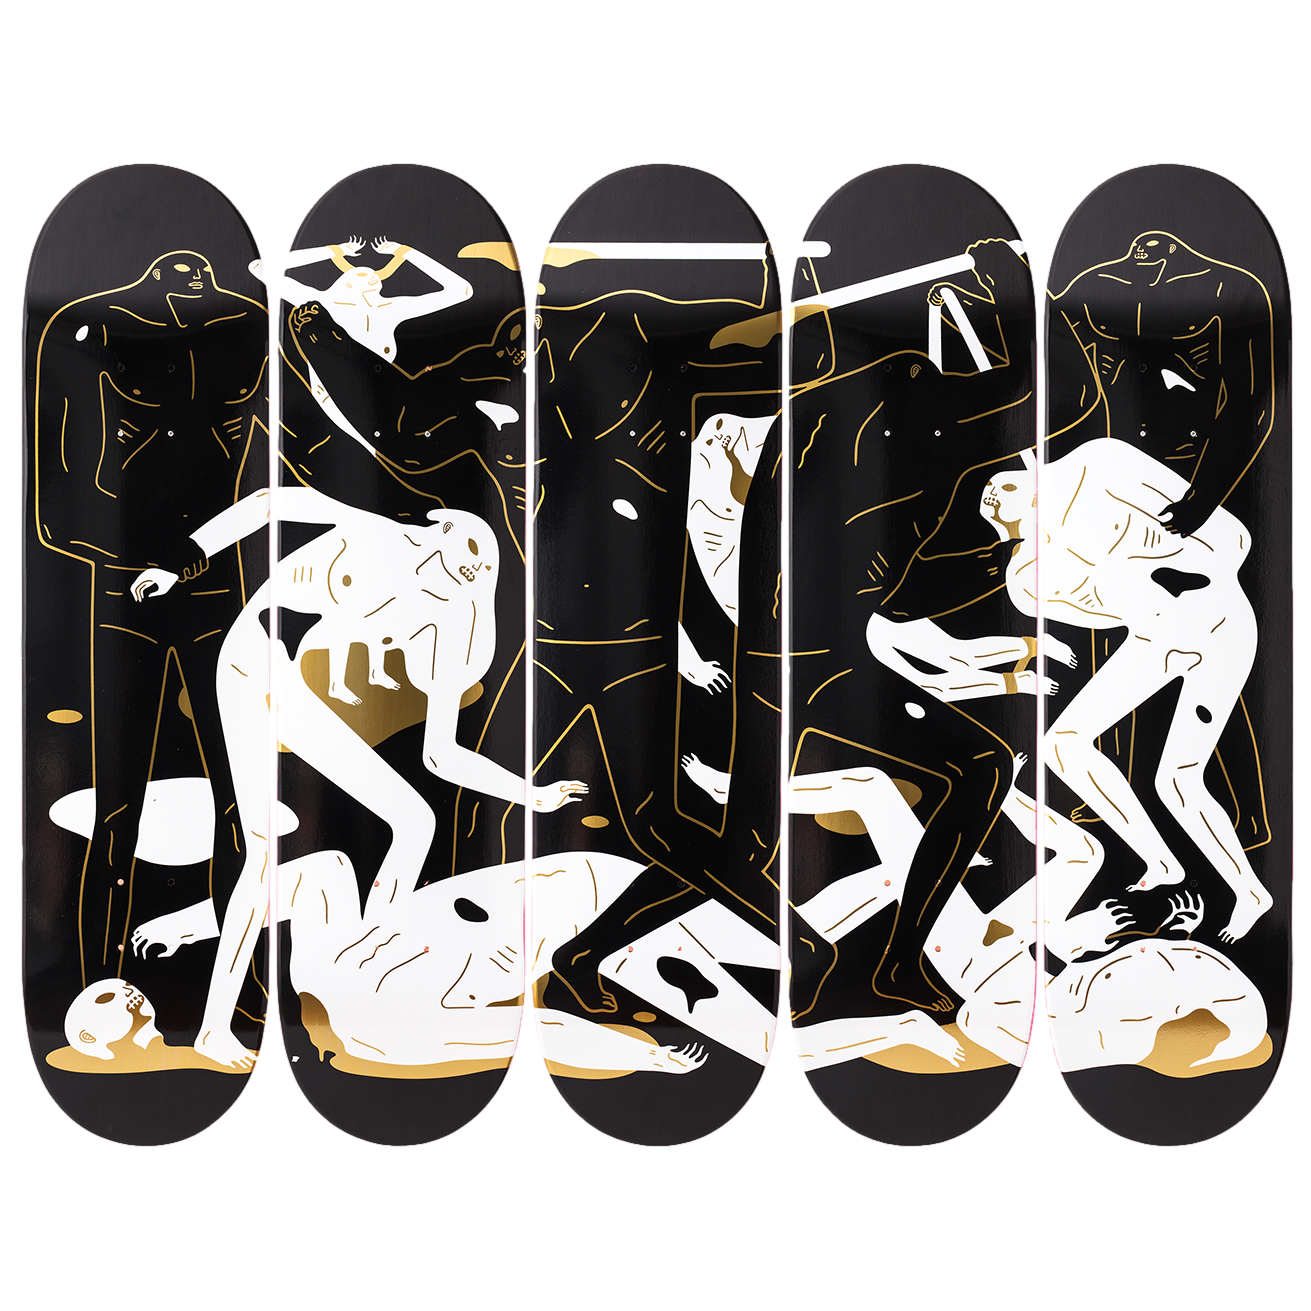 Cleon Peterson "Between Man and God"